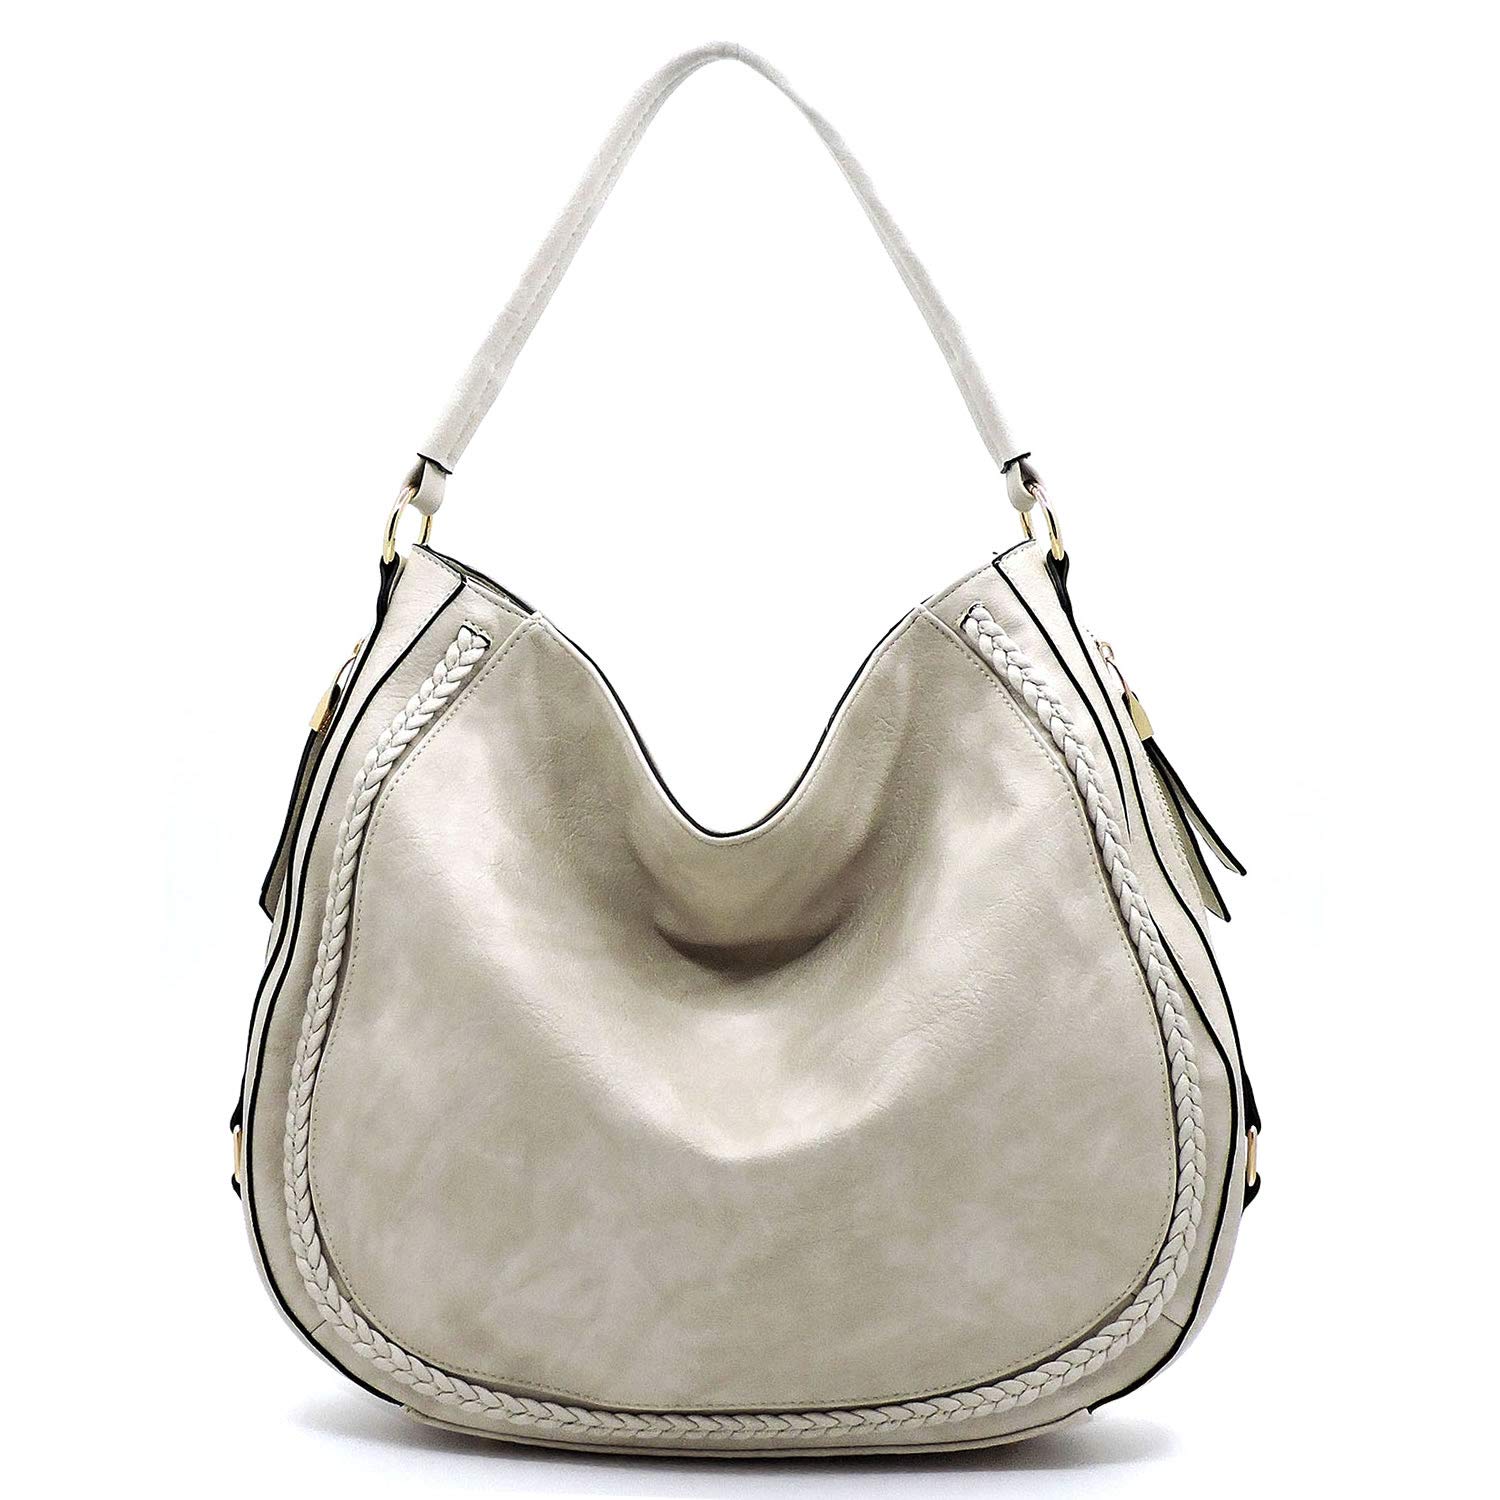 Variation-L01851_OFWH-of-Janin-Handbag-Whipstitch-Accent-Hobo-Style ...